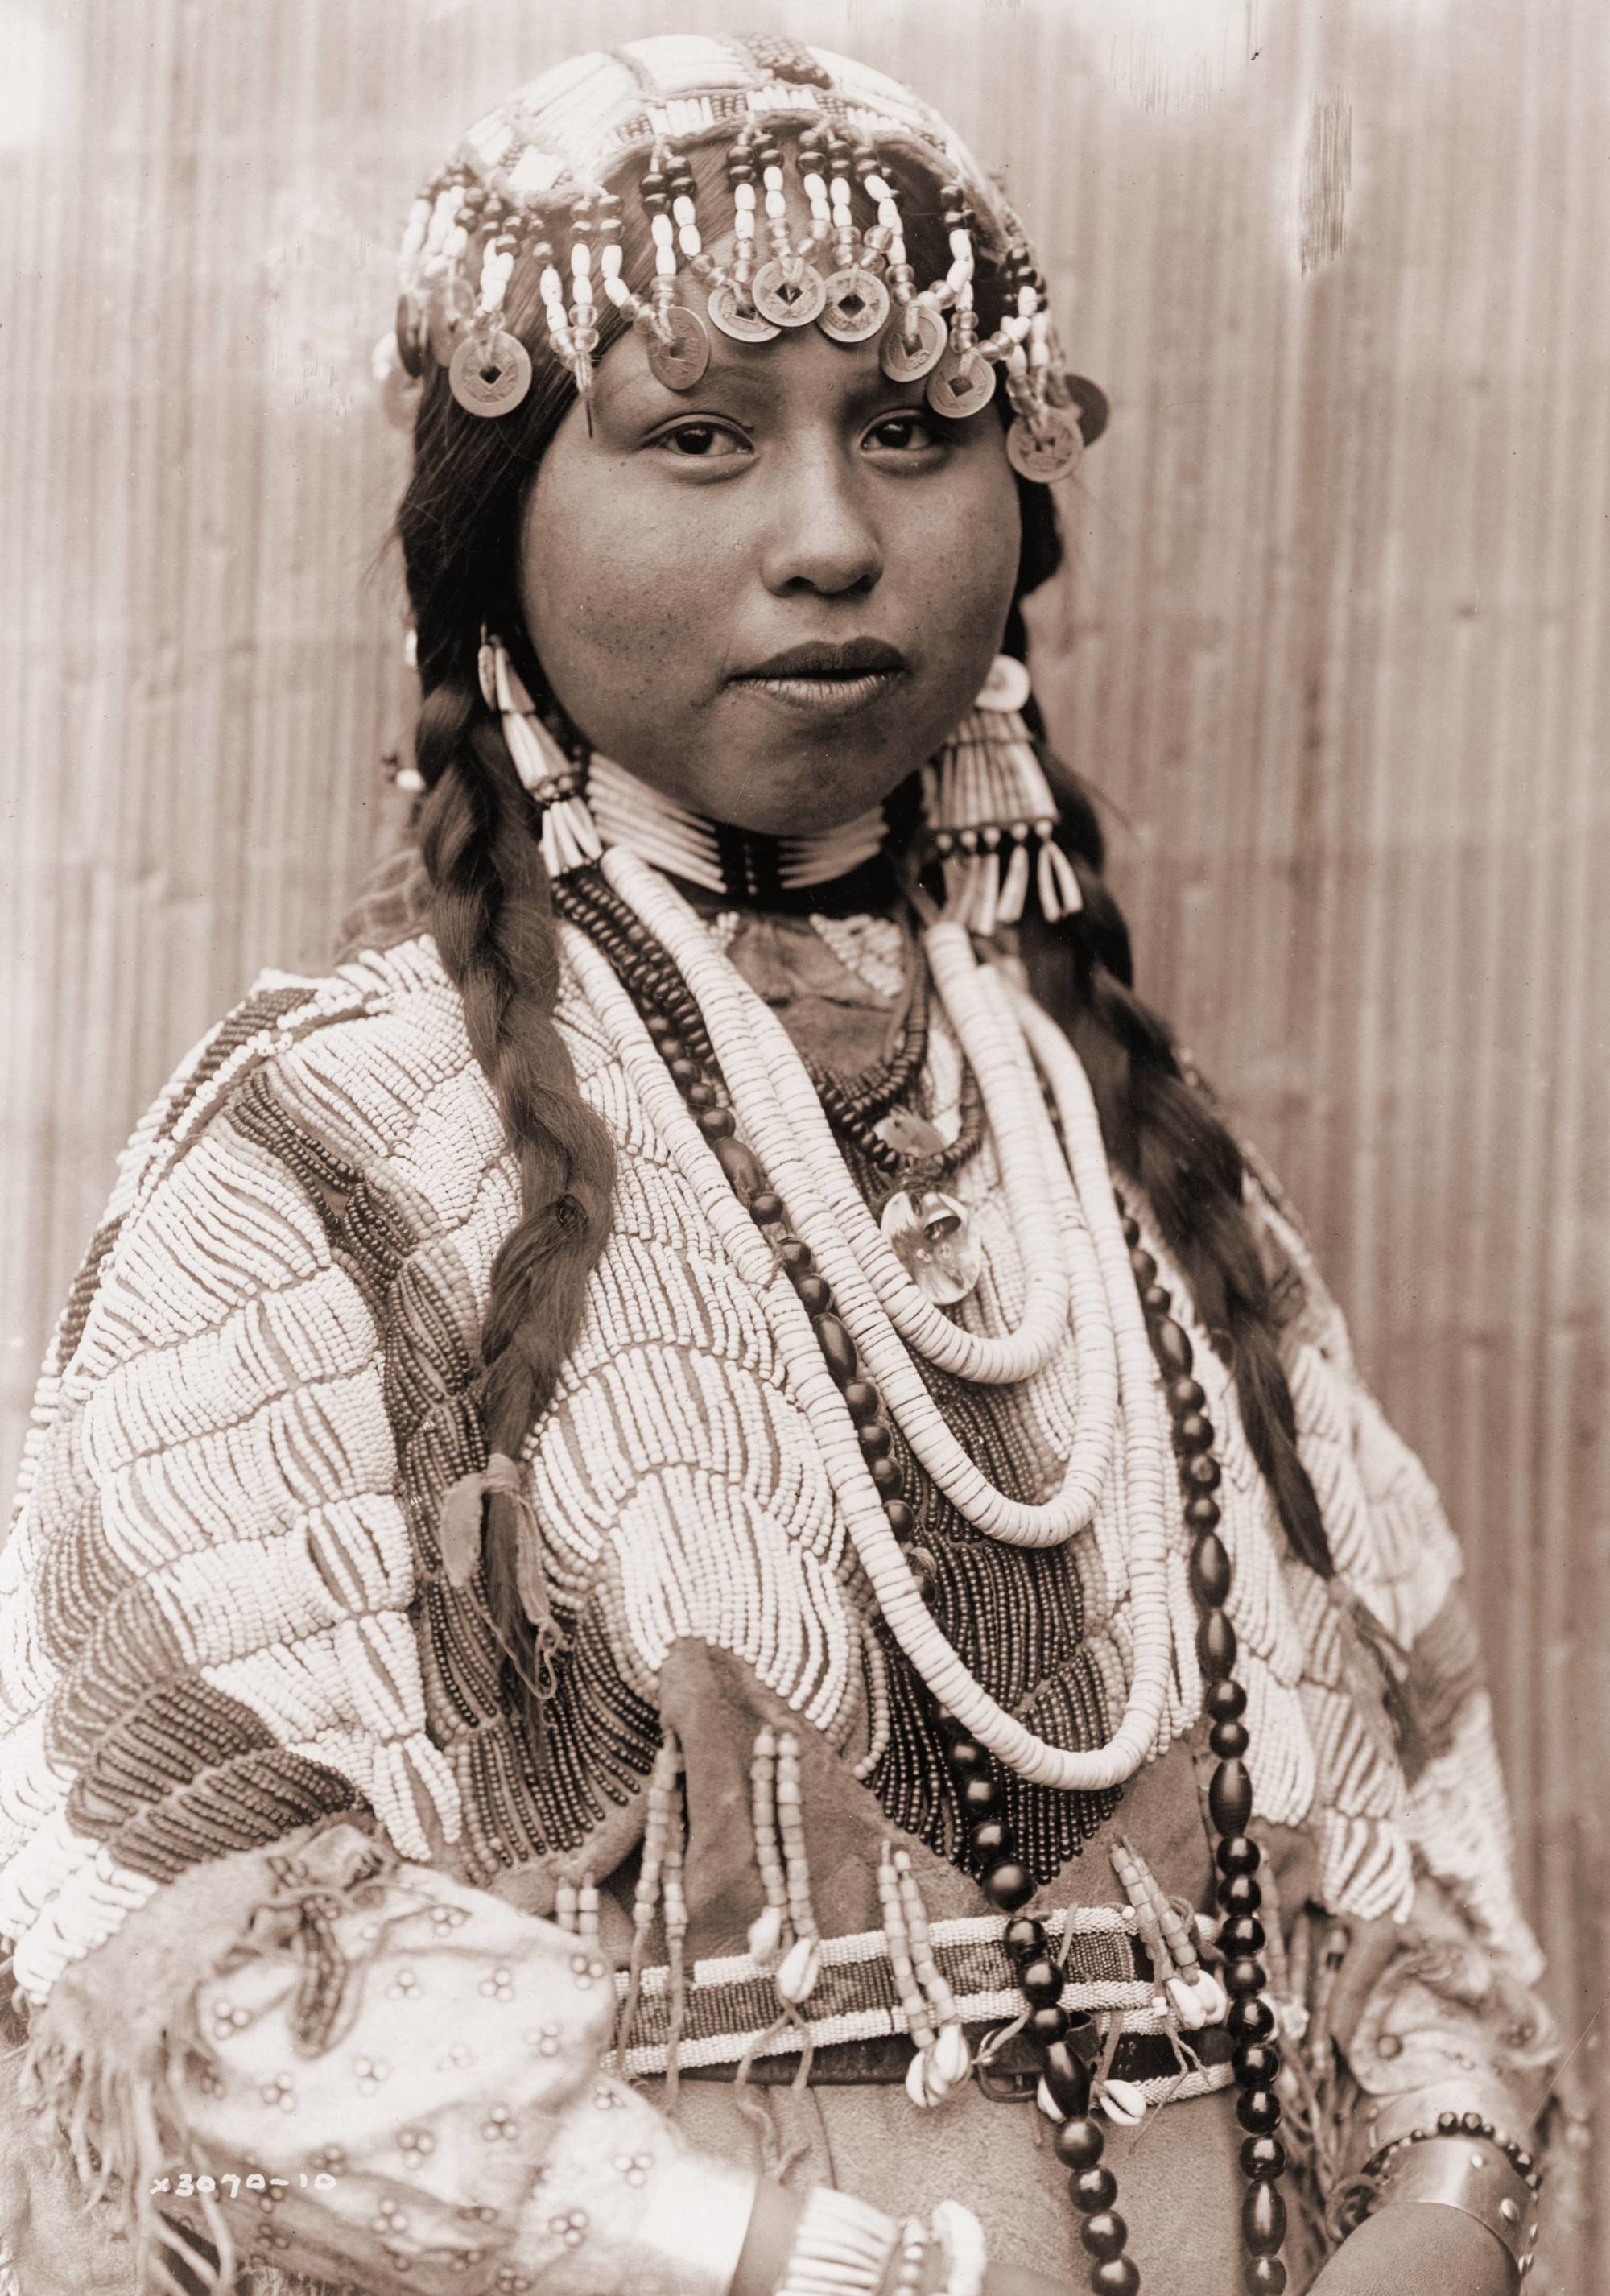 The title of this photo is "Wishram woman in festive bridal raiment", by Edward S. Curtis.